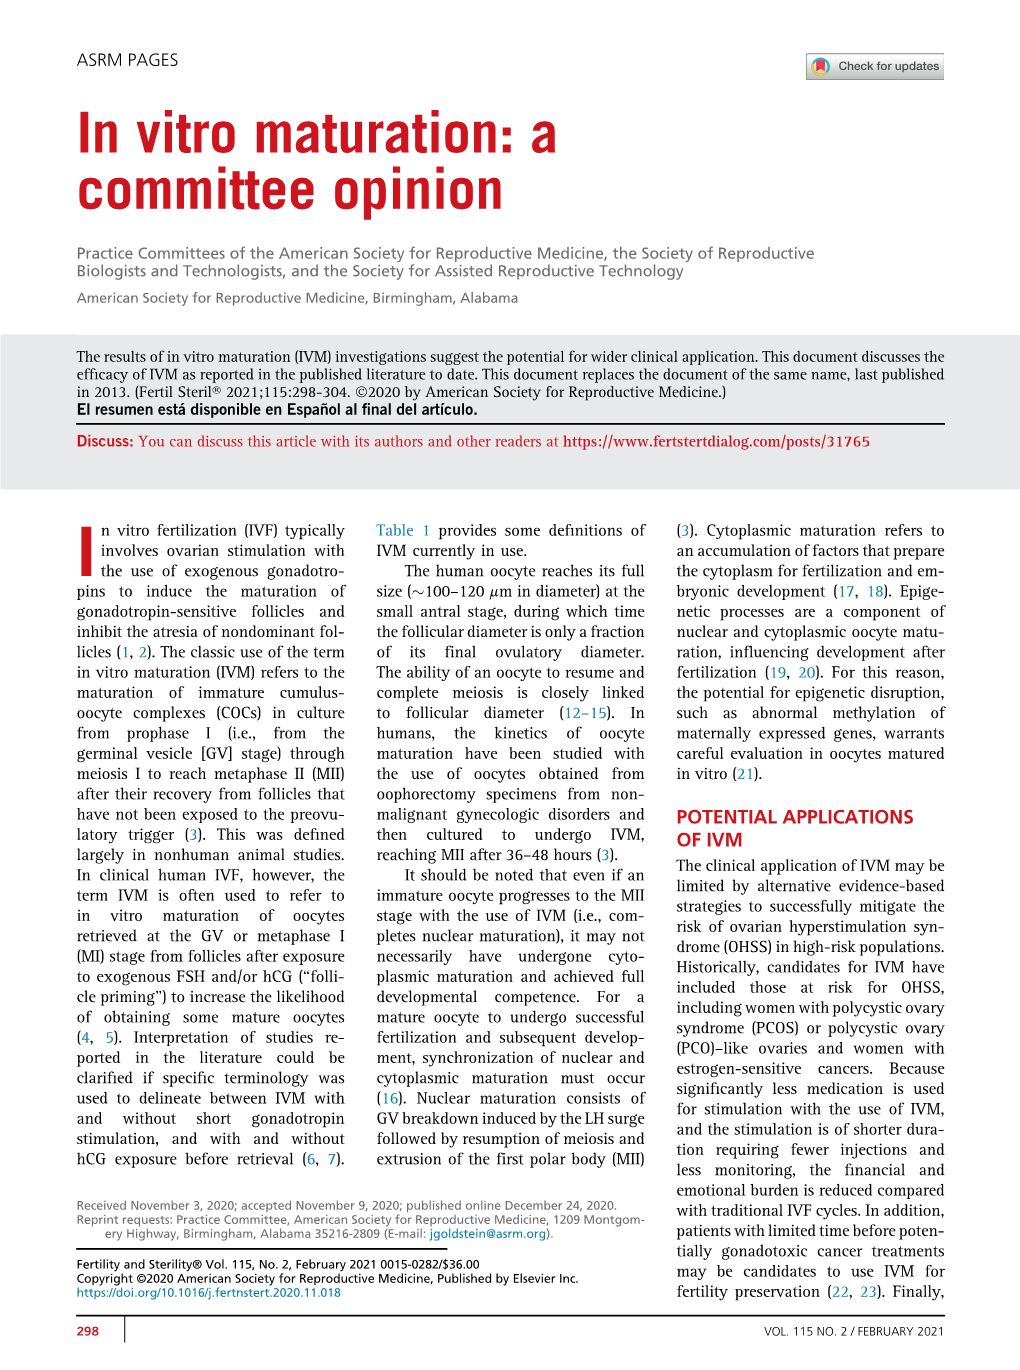 In Vitro Maturation: a Committee Opinion